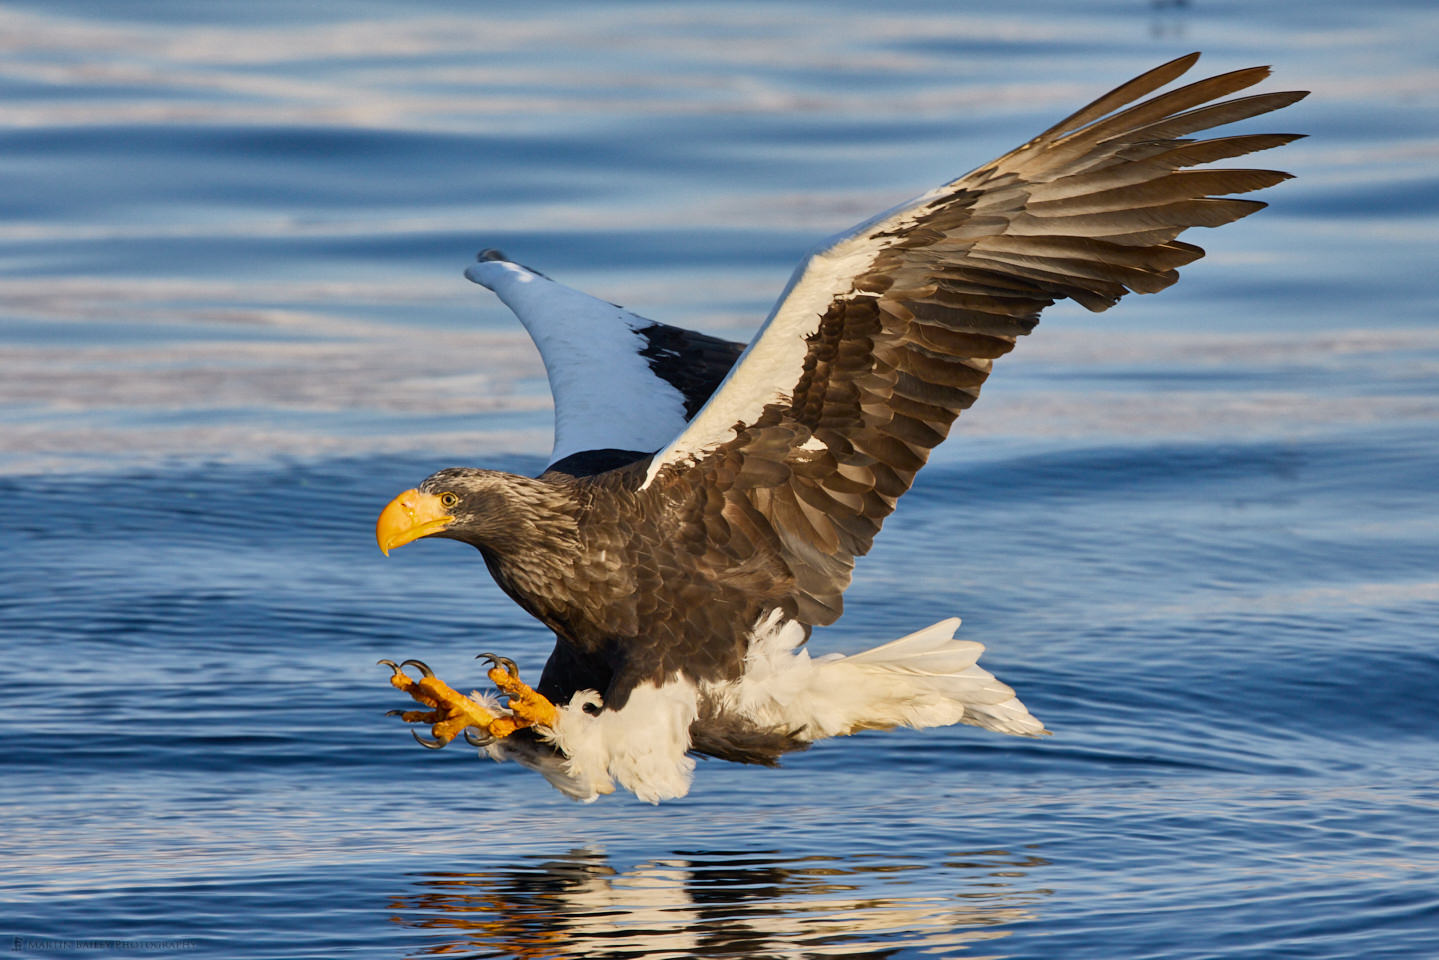 The Approach - Steller's Sea Eagle